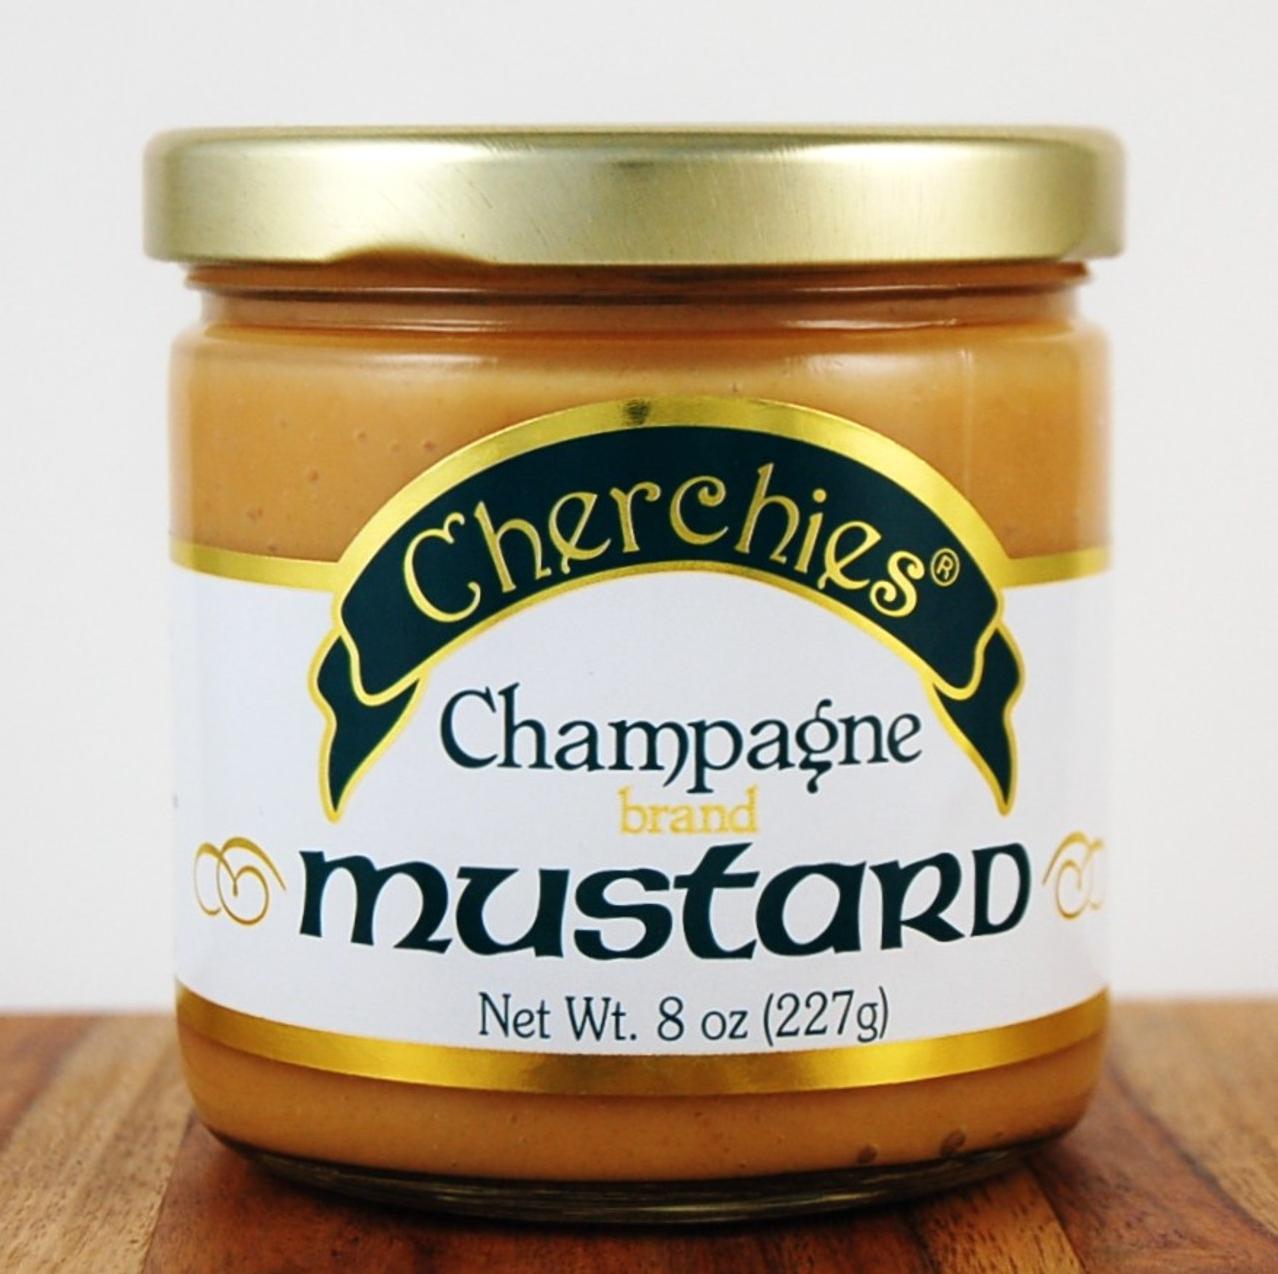  With just a few ingredients, you can make a gourmet mustard at home.